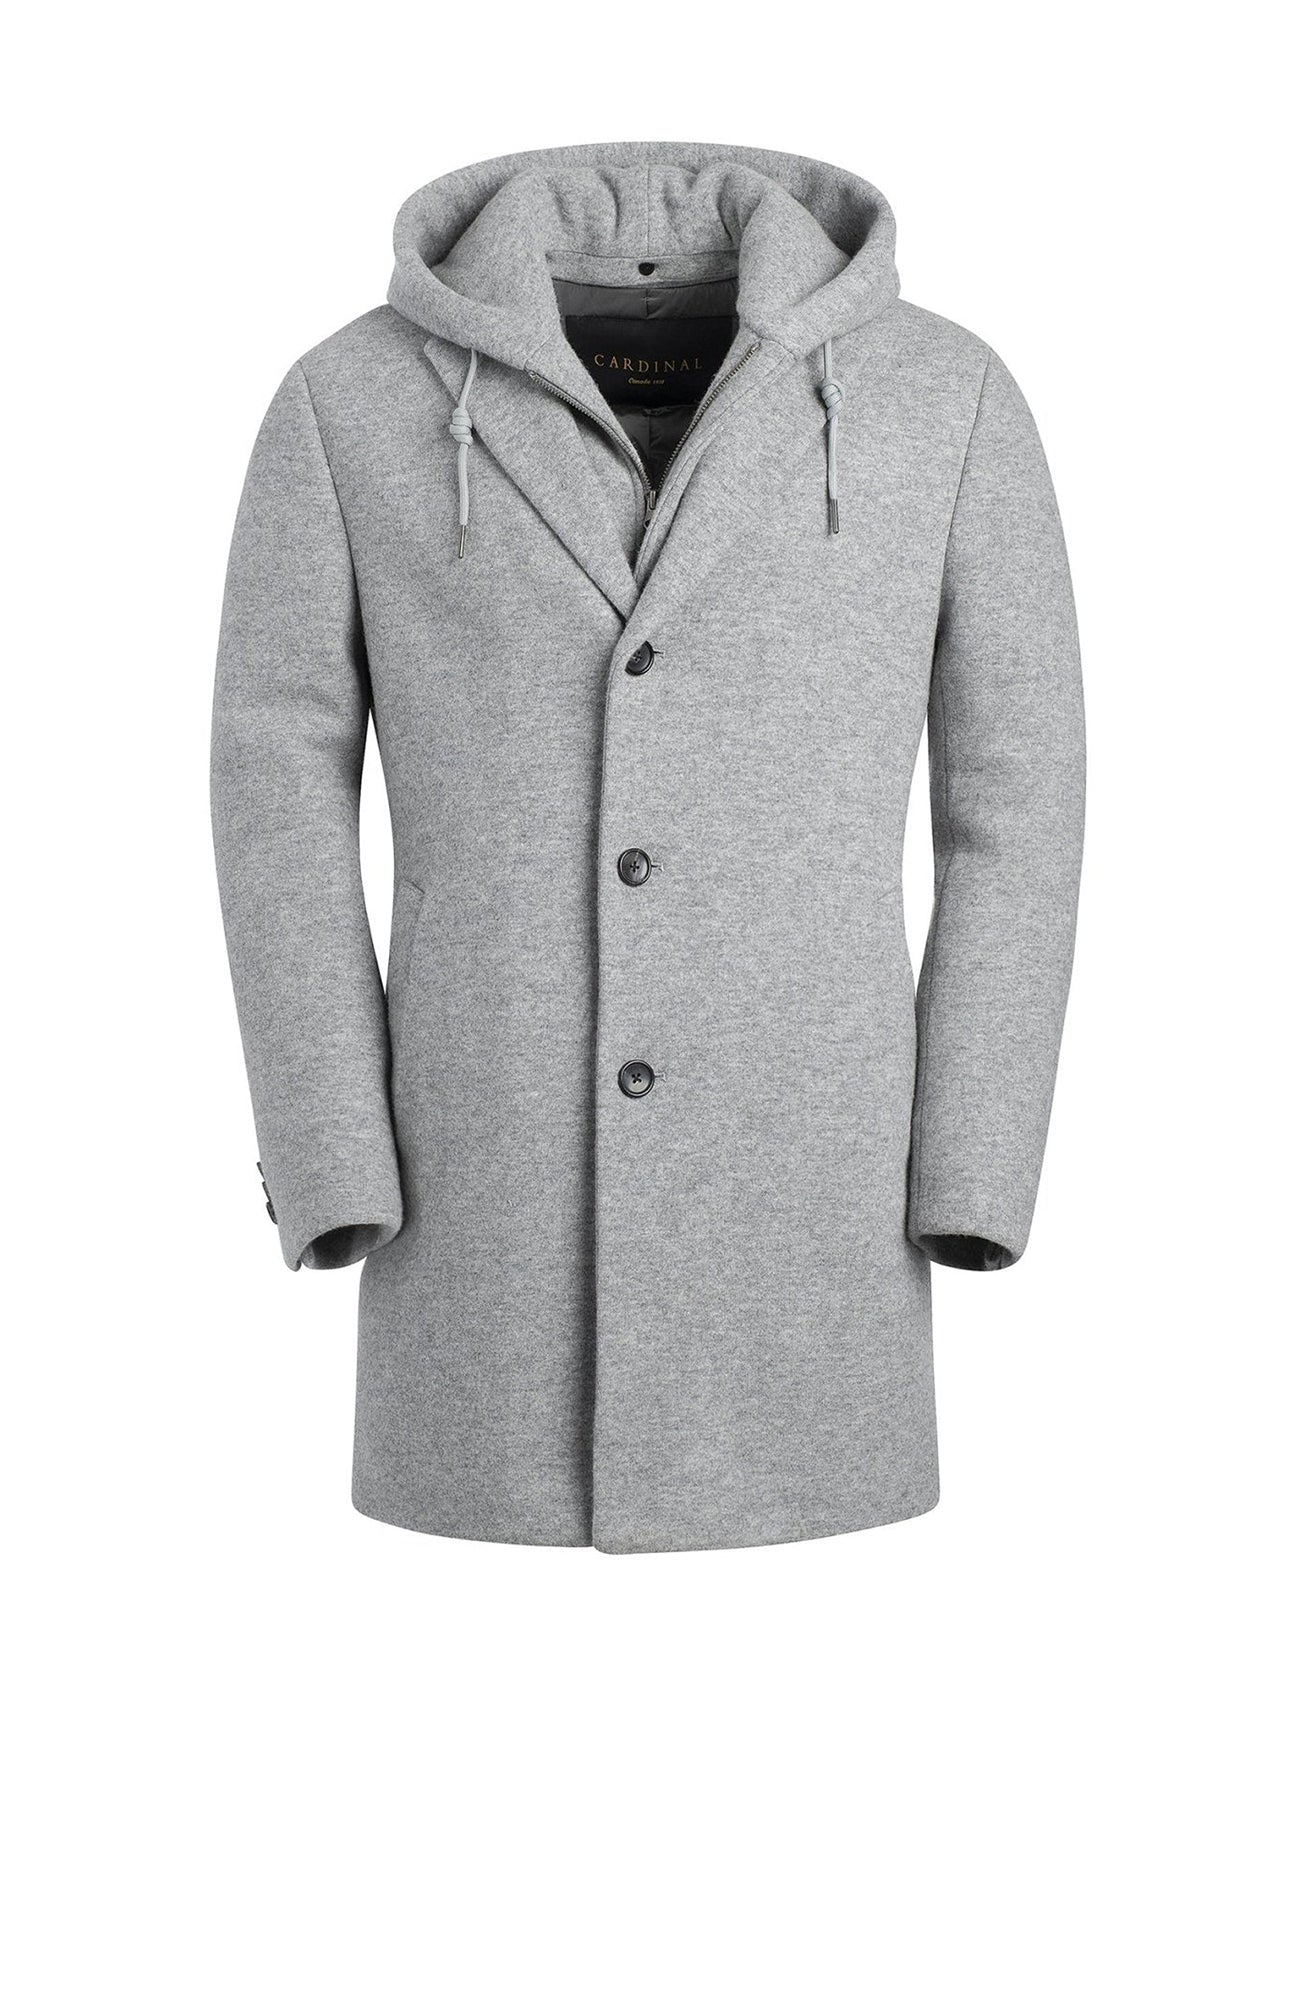  Tyson grey wool top coat 36 inch length with primaloft lining